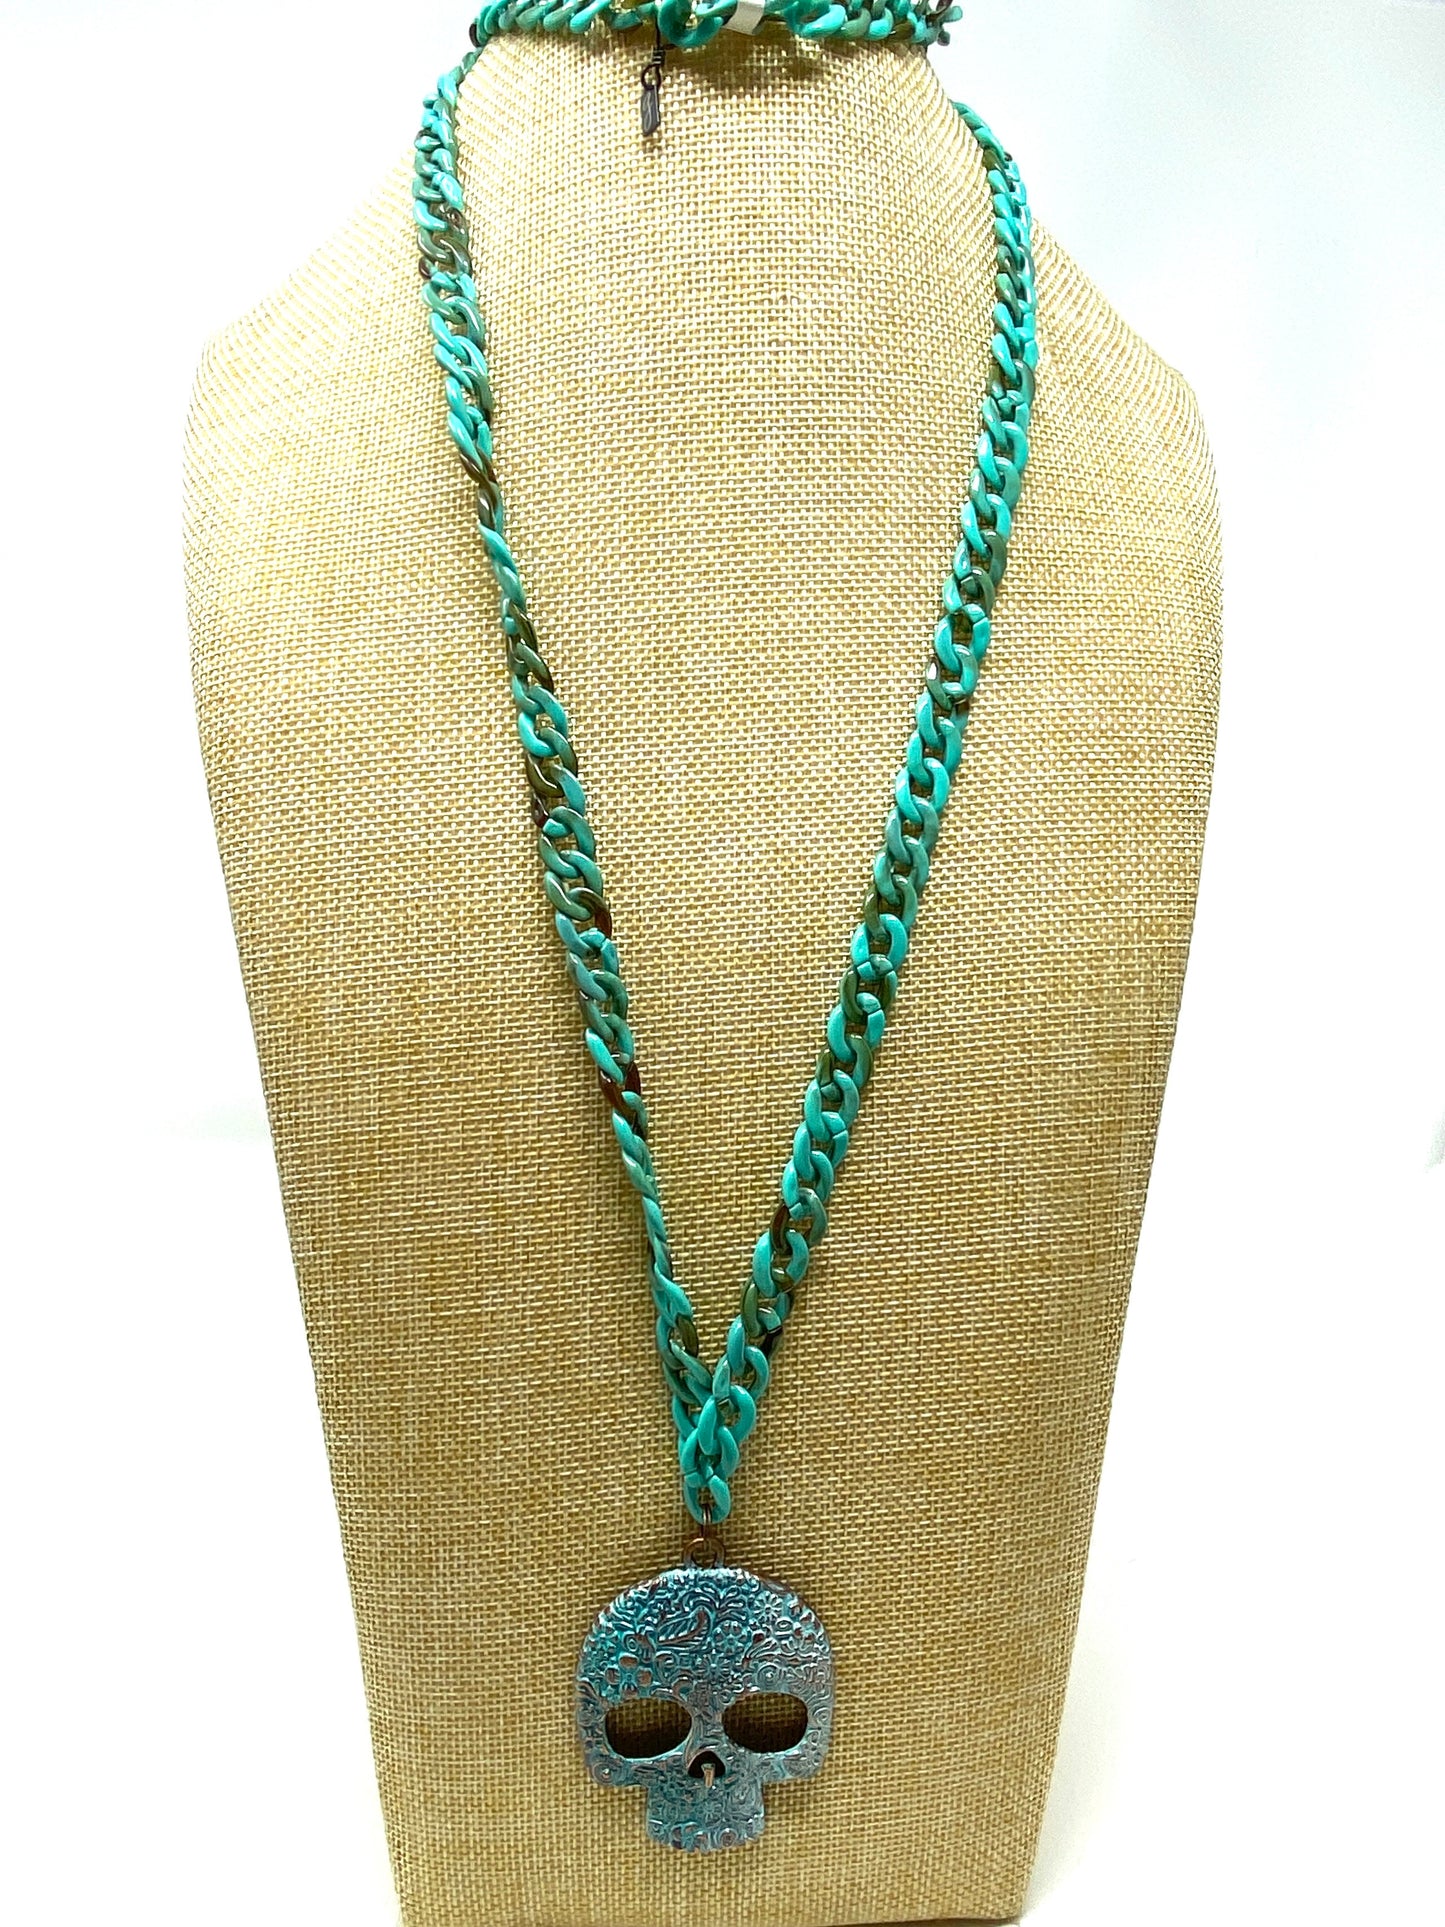 Acrylic Chain Necklace with Painted Brass Skull